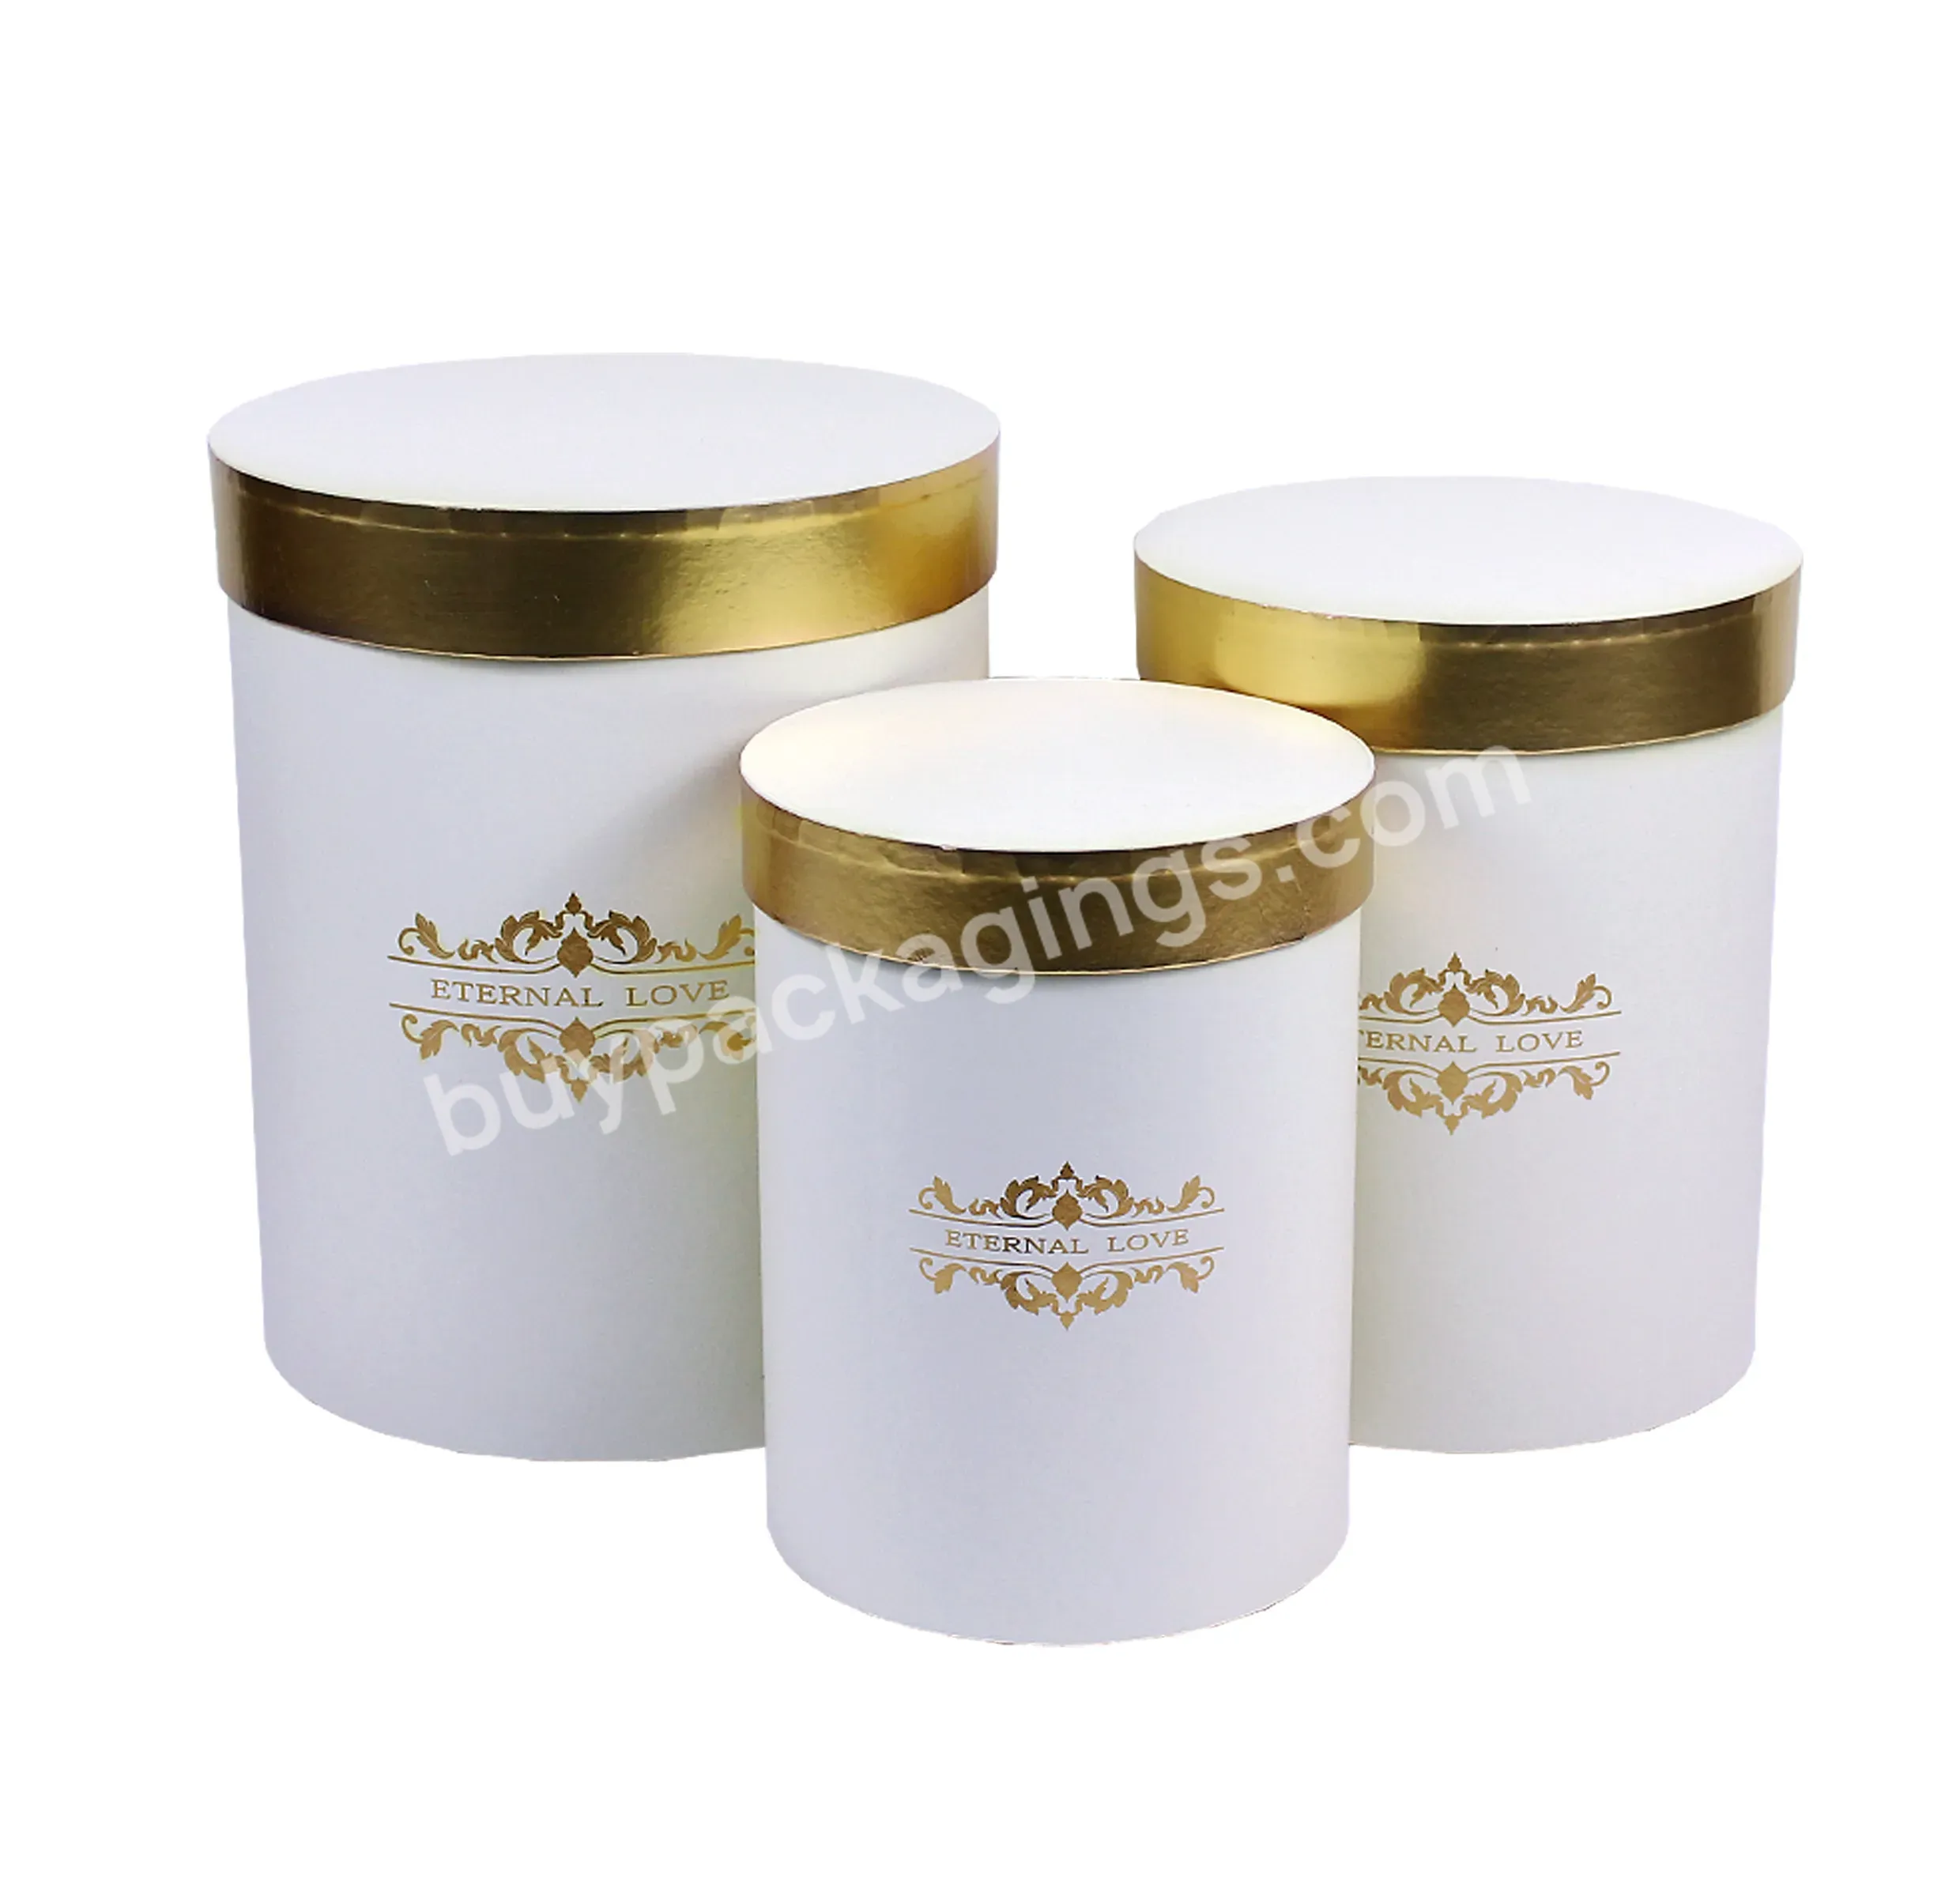 Luxury Cylindrical Rounded 3pcs/set Flower Gift Paper Box With Eternal Love Printed - Buy Cylindrical Rounded Flower Box,3pcs/set Flower Gift Paper Box,Paper Box With Eternal Love Printed.